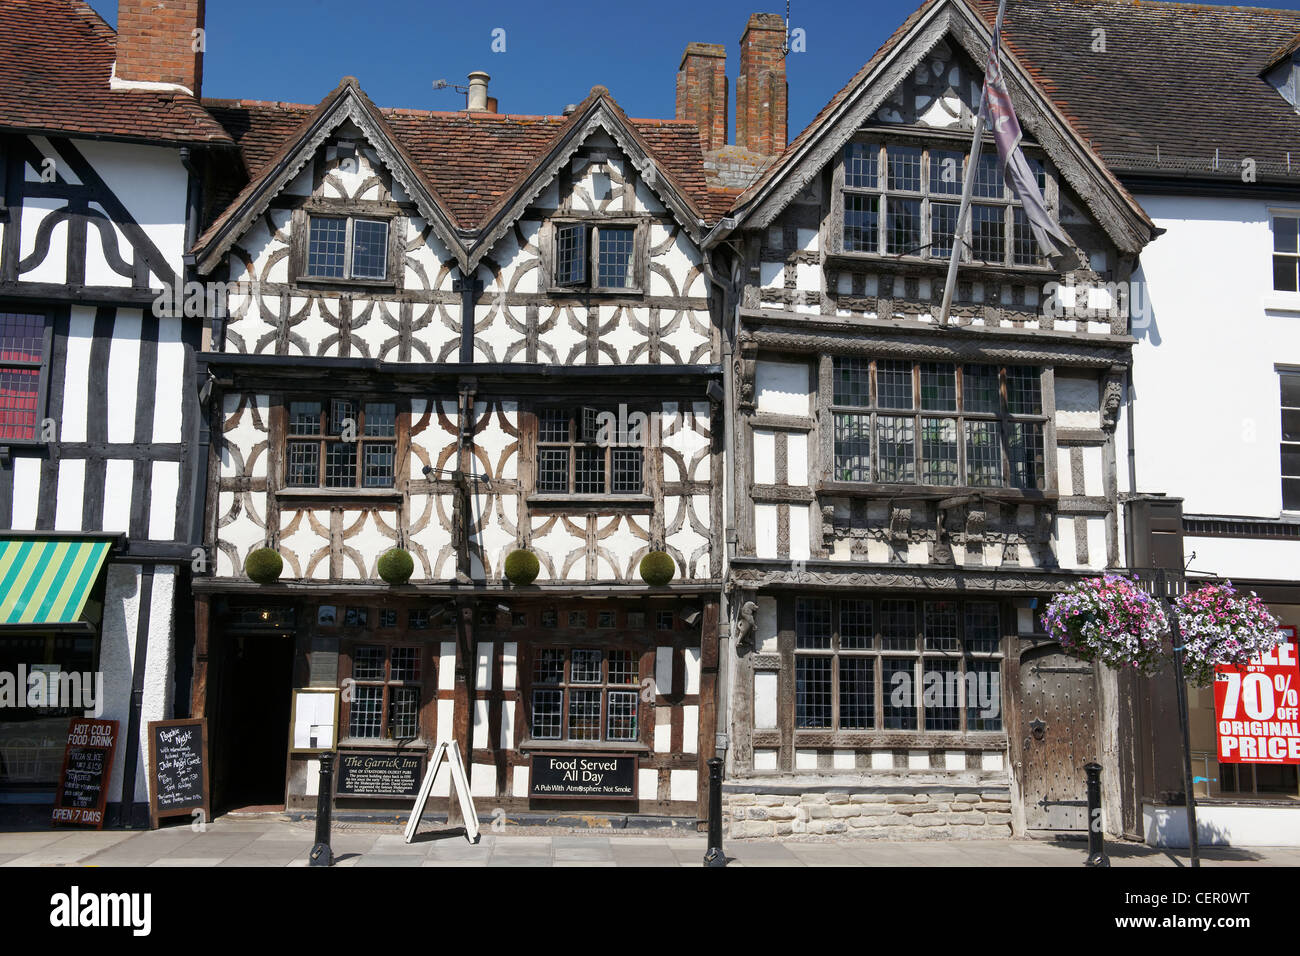 The Garrick Inn and Harvard House on the main high street in Stratford-upon-Avon. The Garrick Inn is a traditional black and whi Stock Photo